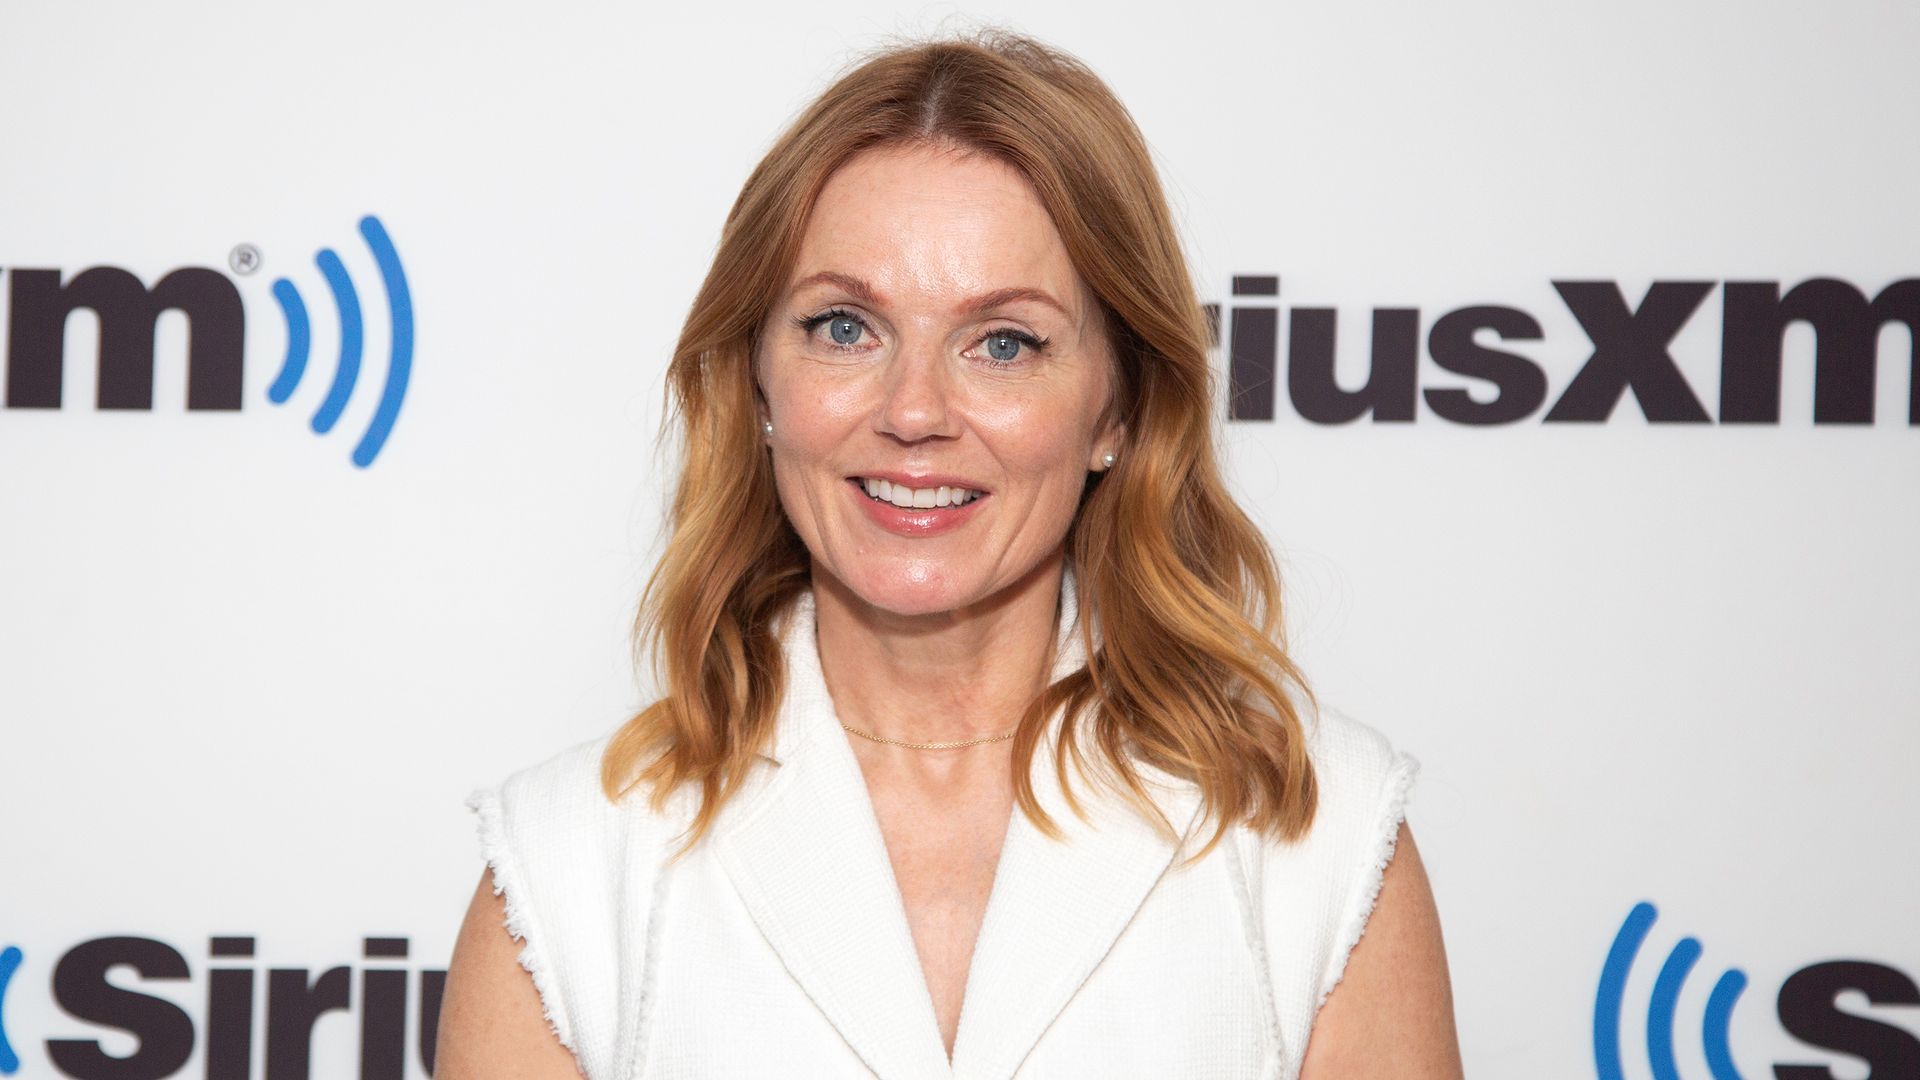 Geri Halliwell-Horner in a white outfit